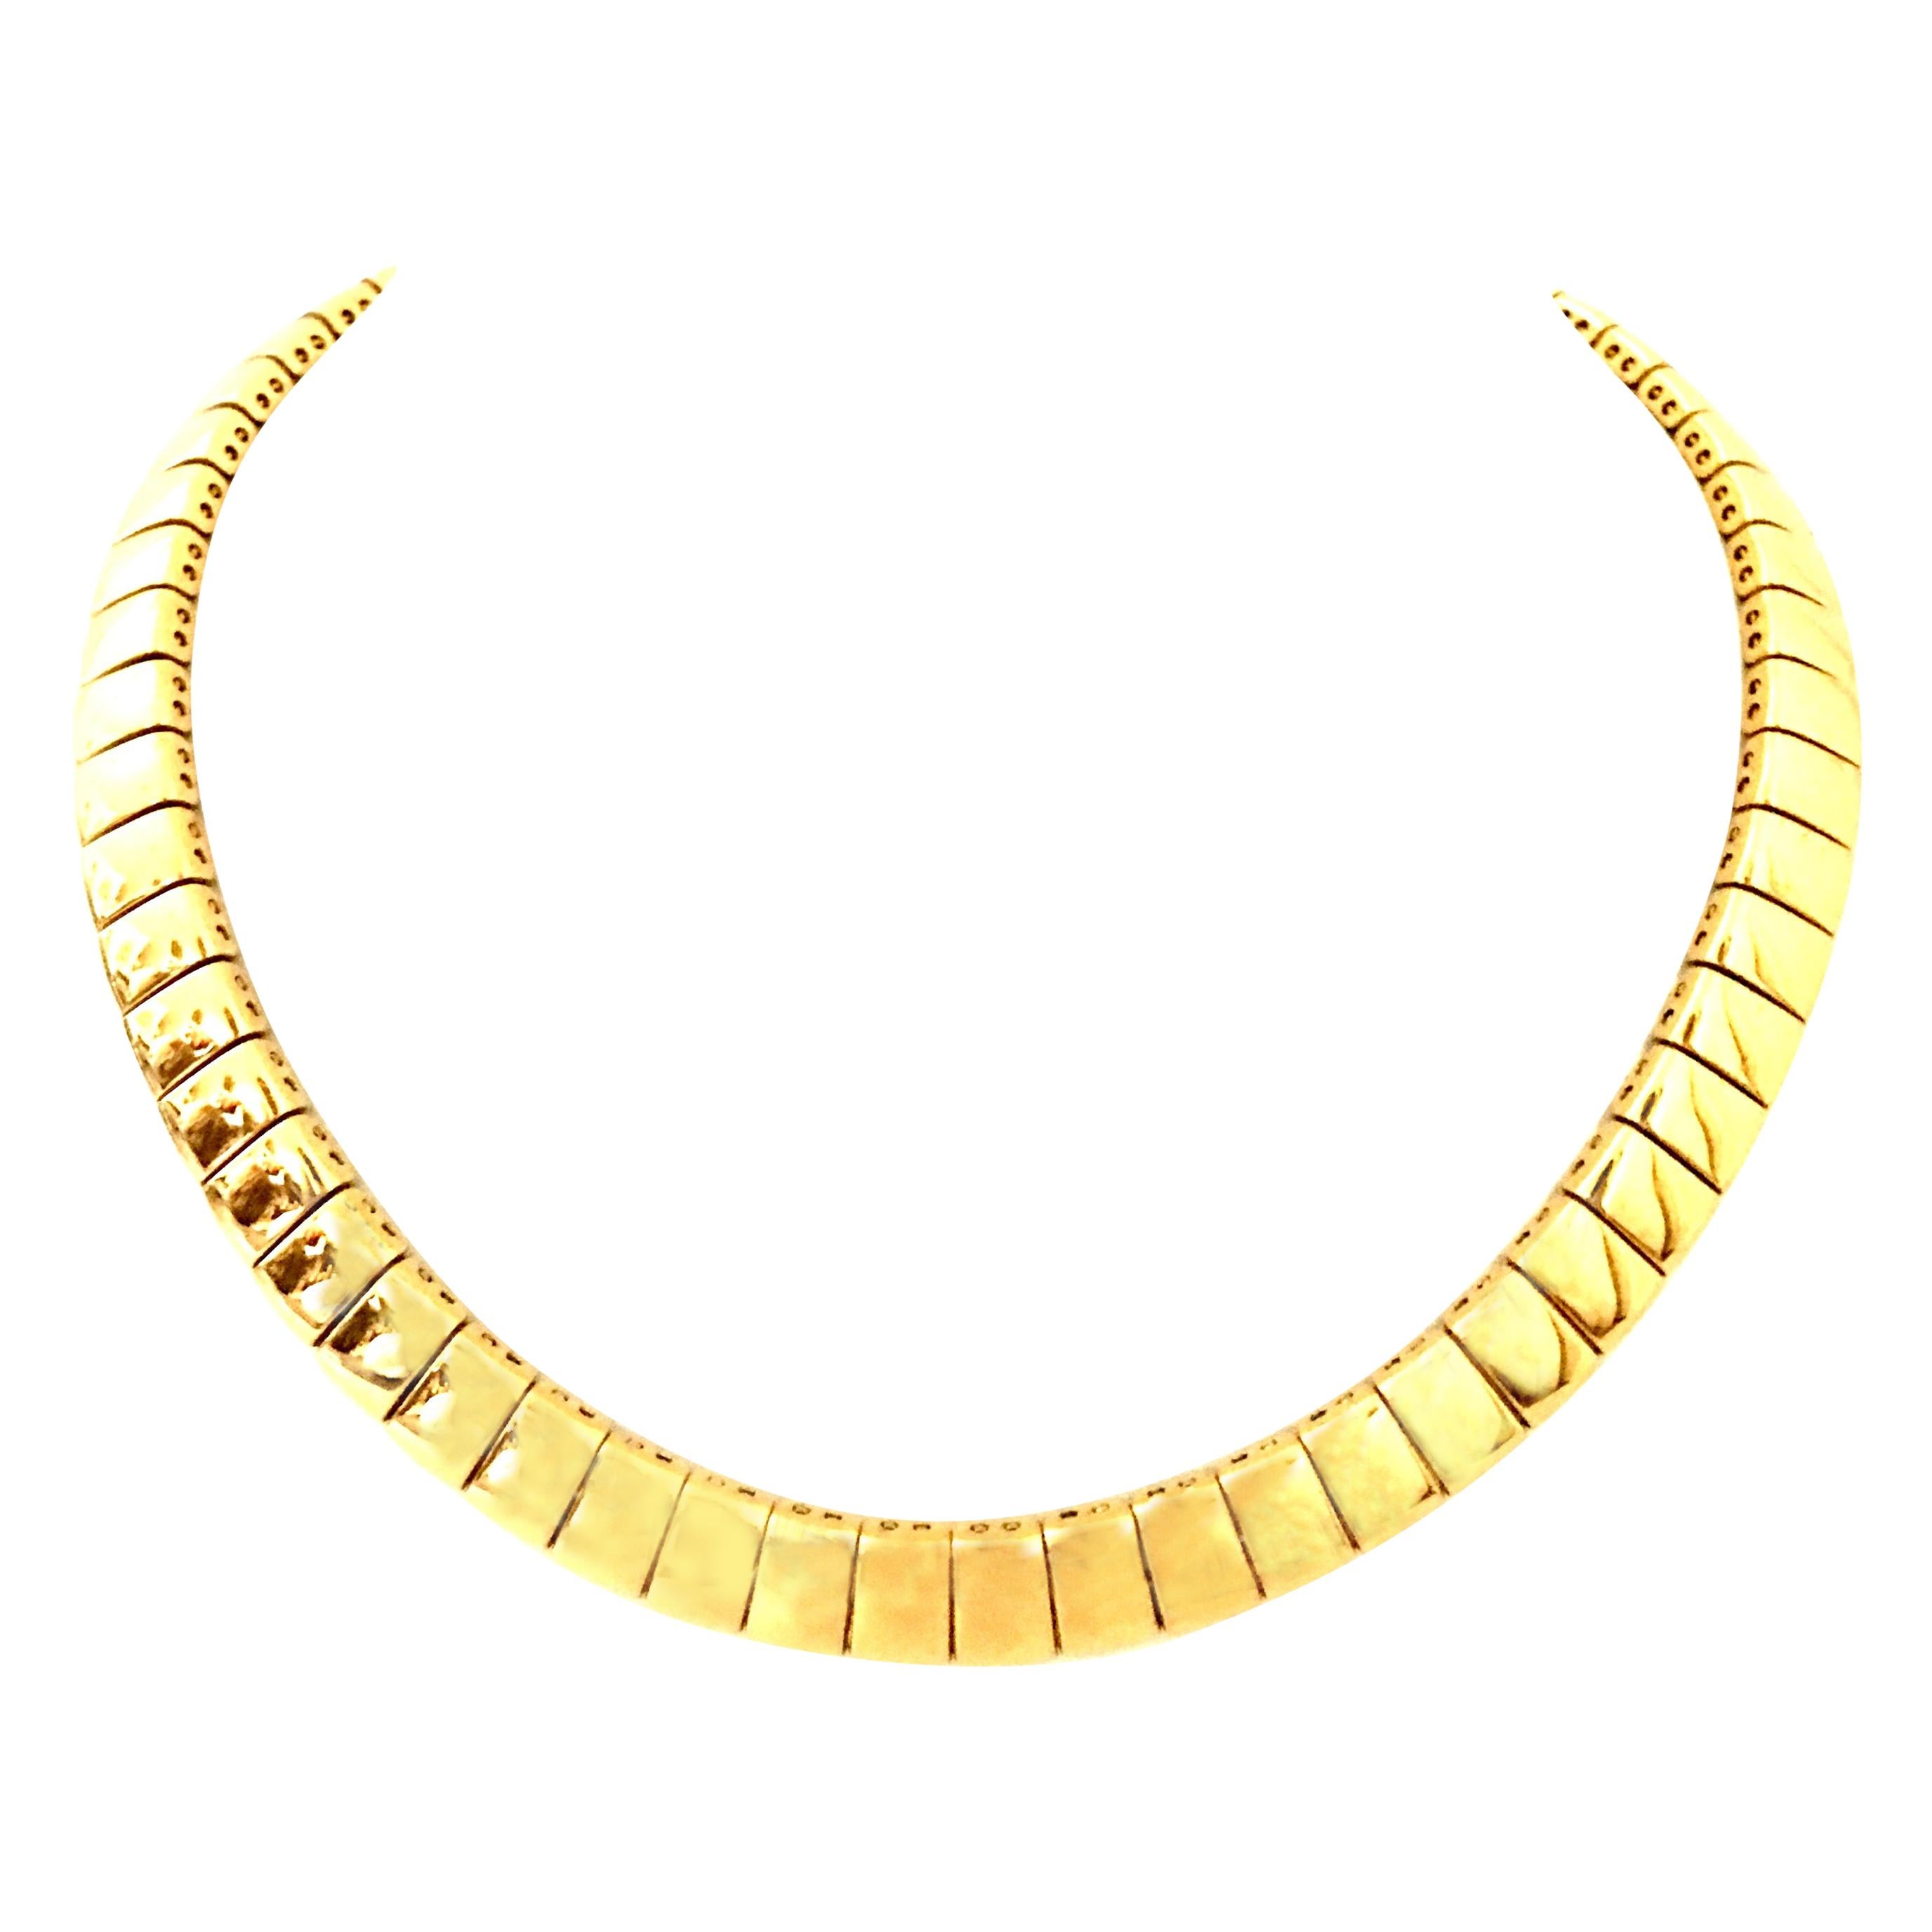 20th Century Italian Gold Link Choker Style Necklace By, Napier